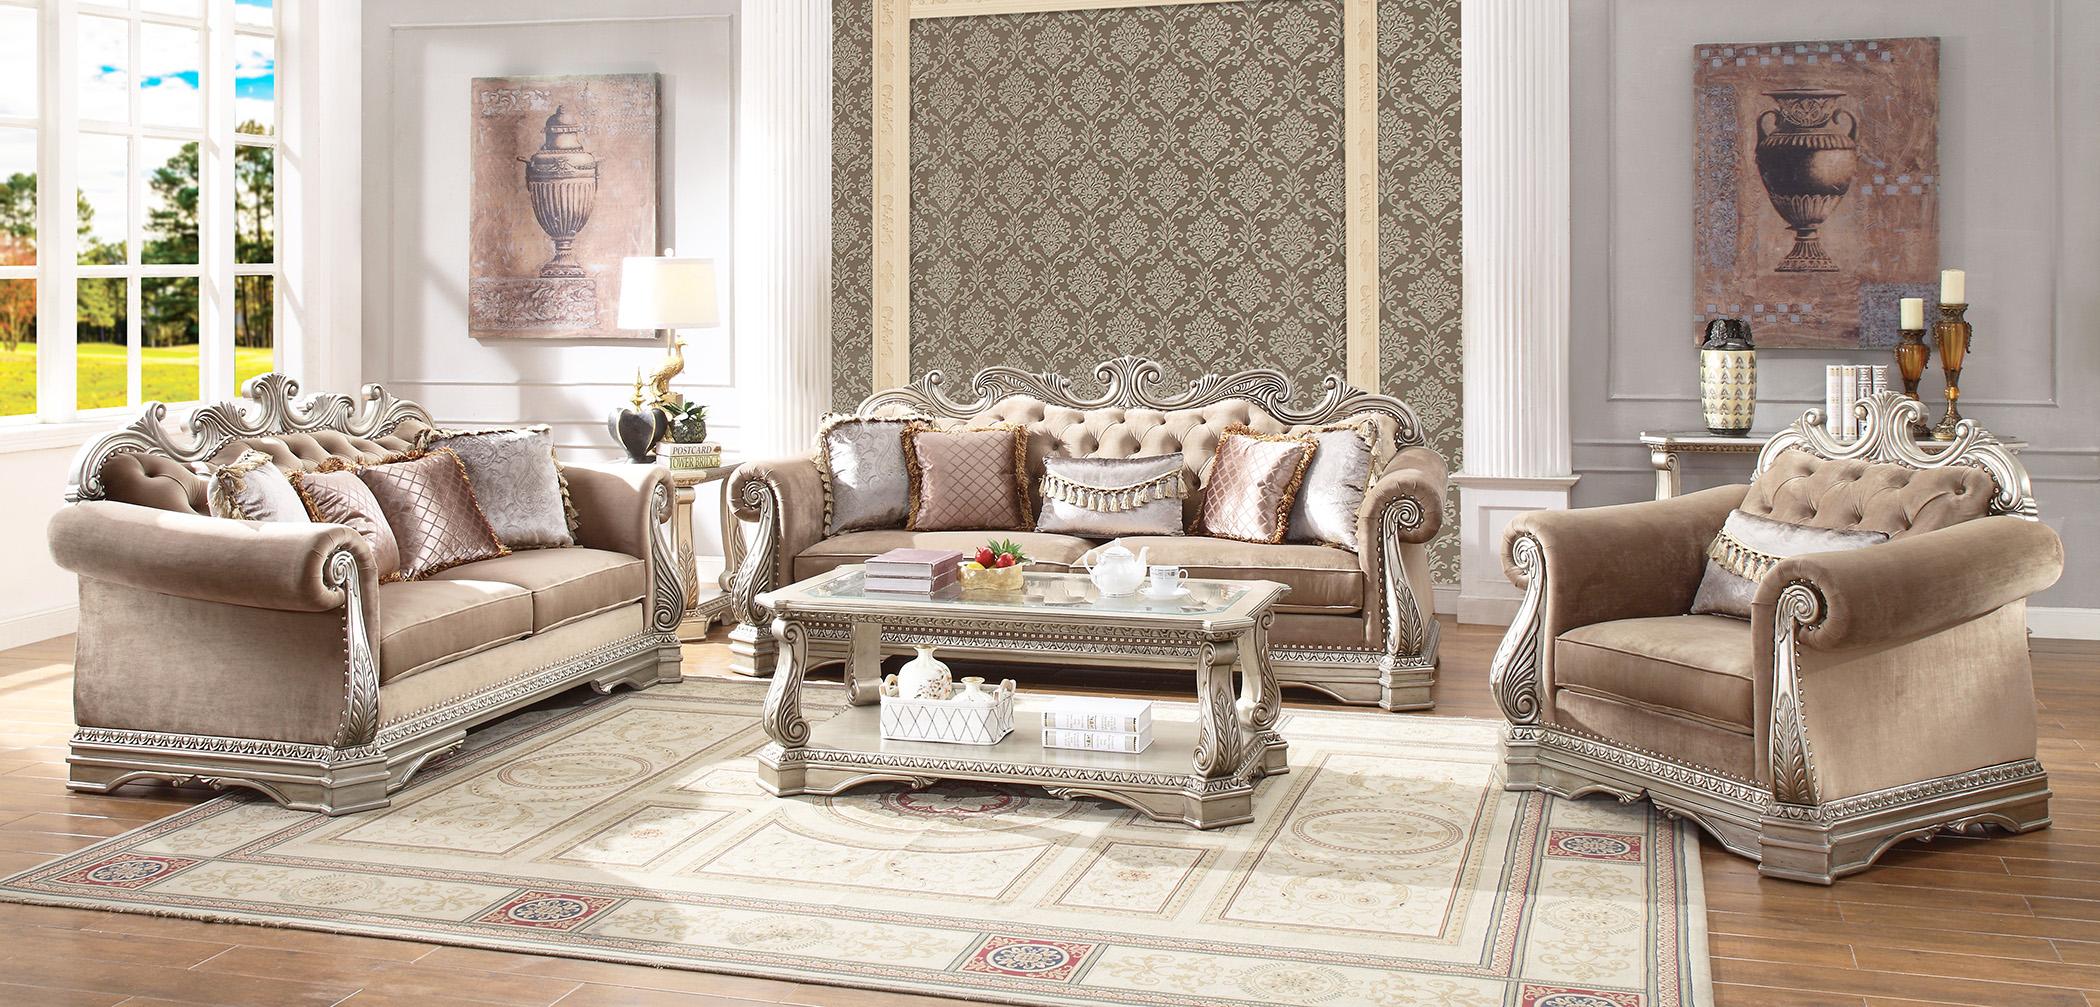 Classic, Traditional Sofa Loveseat Chair Coffee Table Northville-56930 Northville-56930-Set-4 in Antique, Champagne Velvet